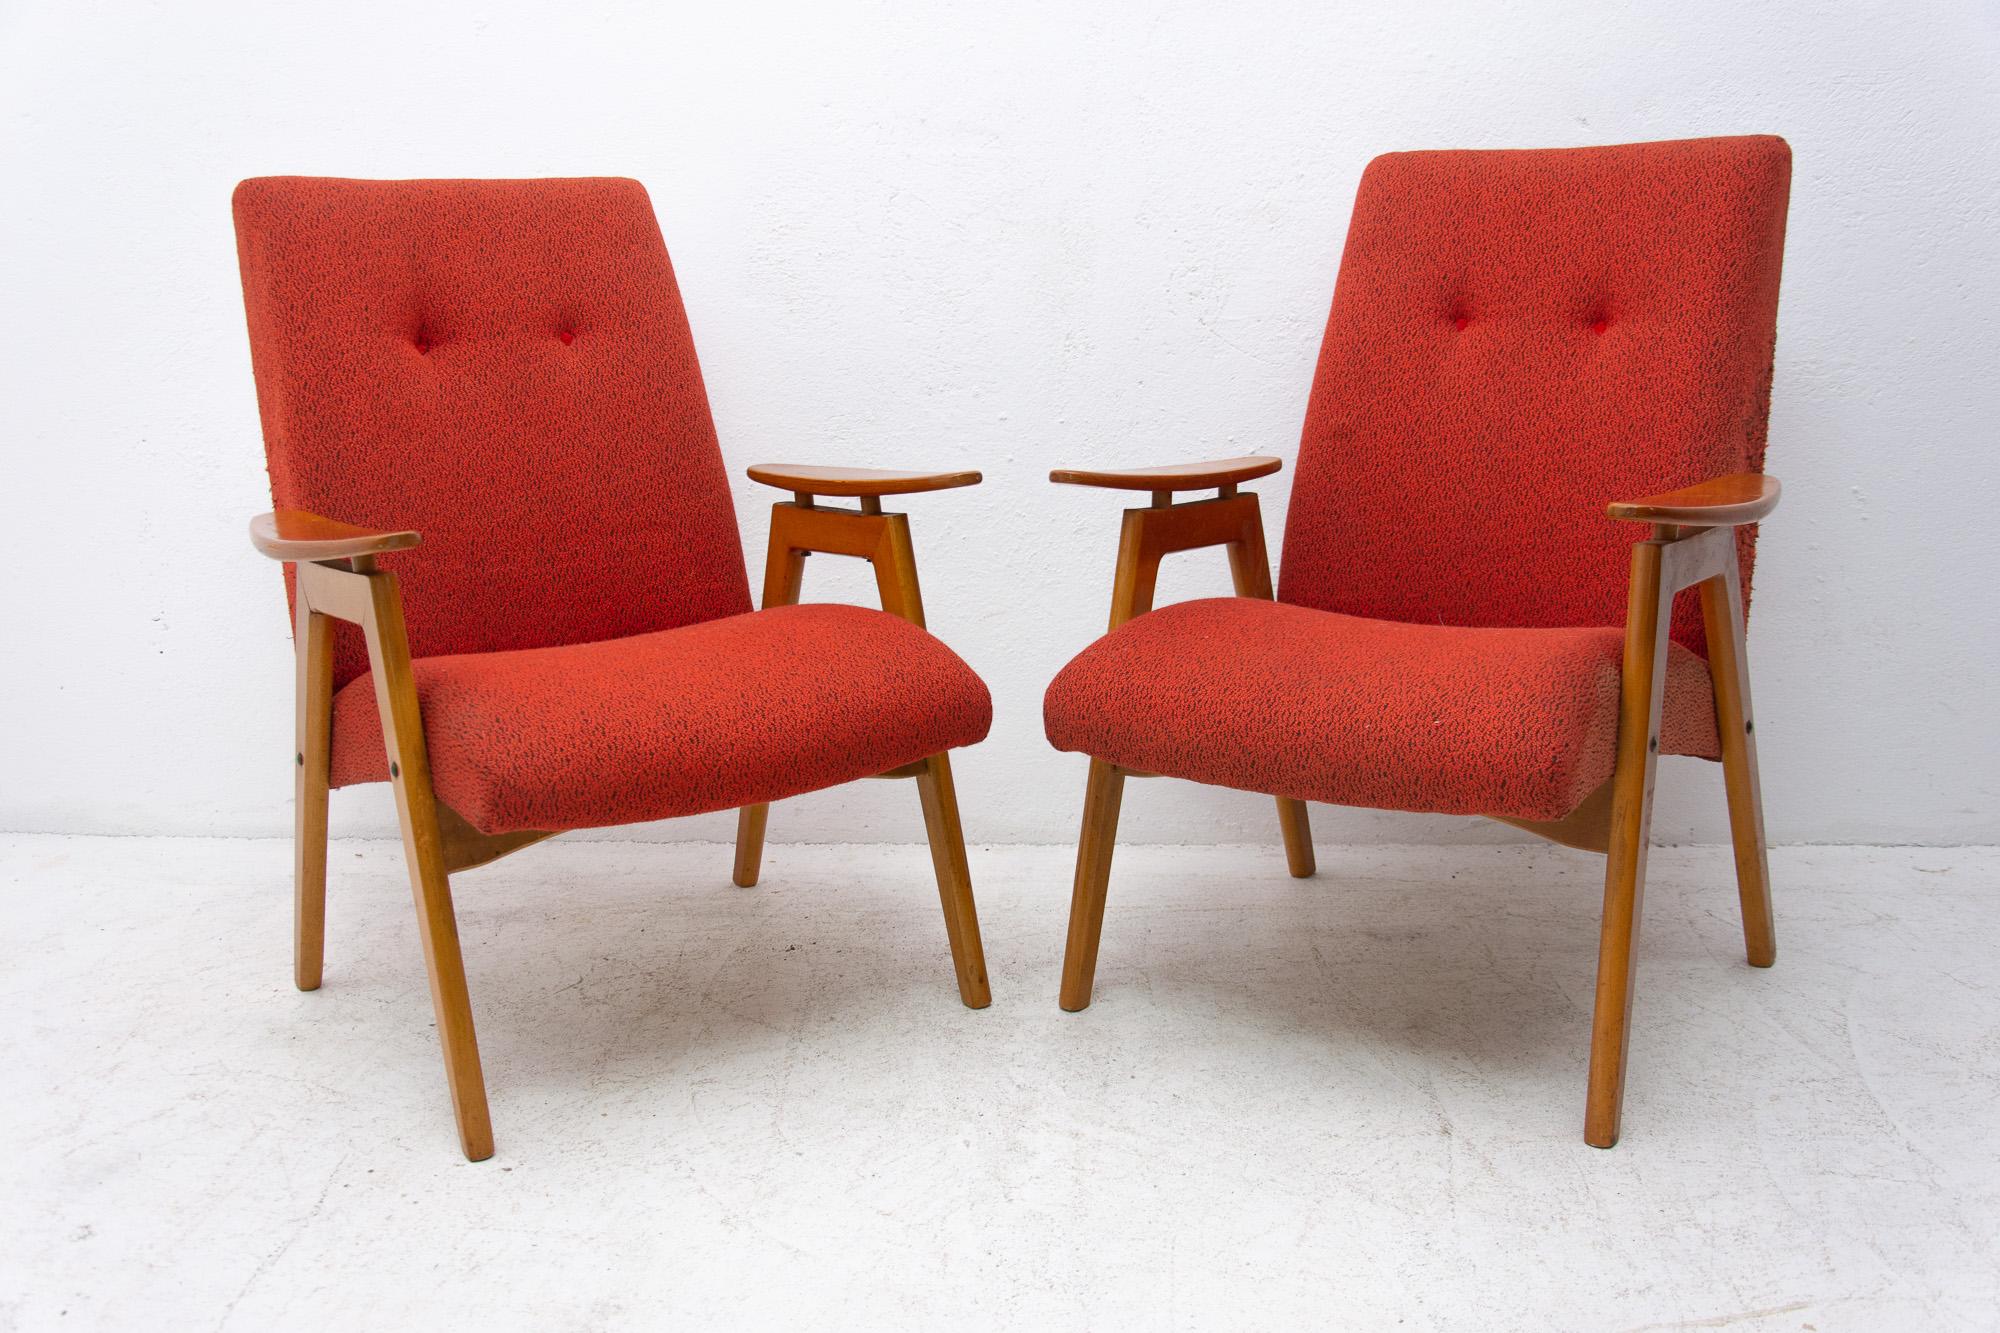 These bentwood armchairs were designed by Jaroslav Šmídek and made by JITONA company in the former Czechoslovakia in the 1960s.

The chairs are stable and comfortable. They are in good Vintage condition, showing slight signs of age and